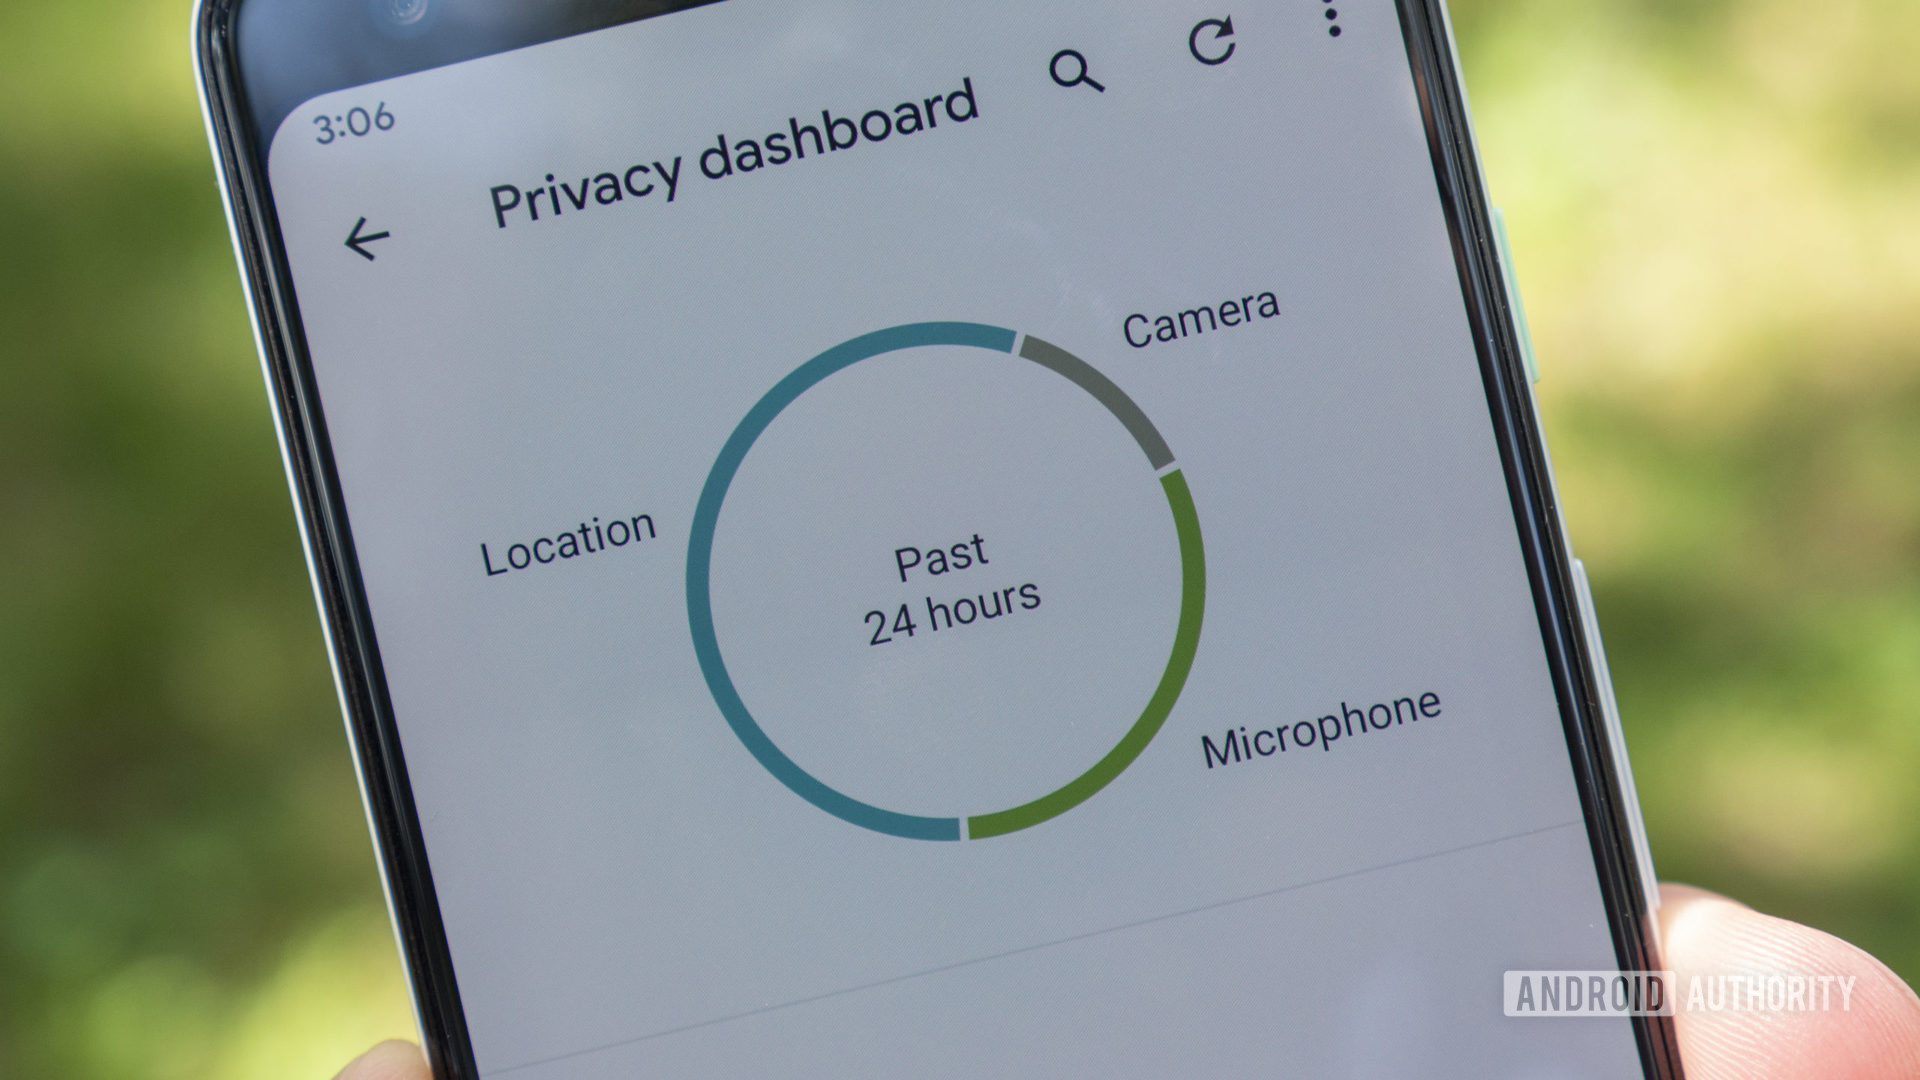 android 12 beta 2 privacy dashboard pie chart 2